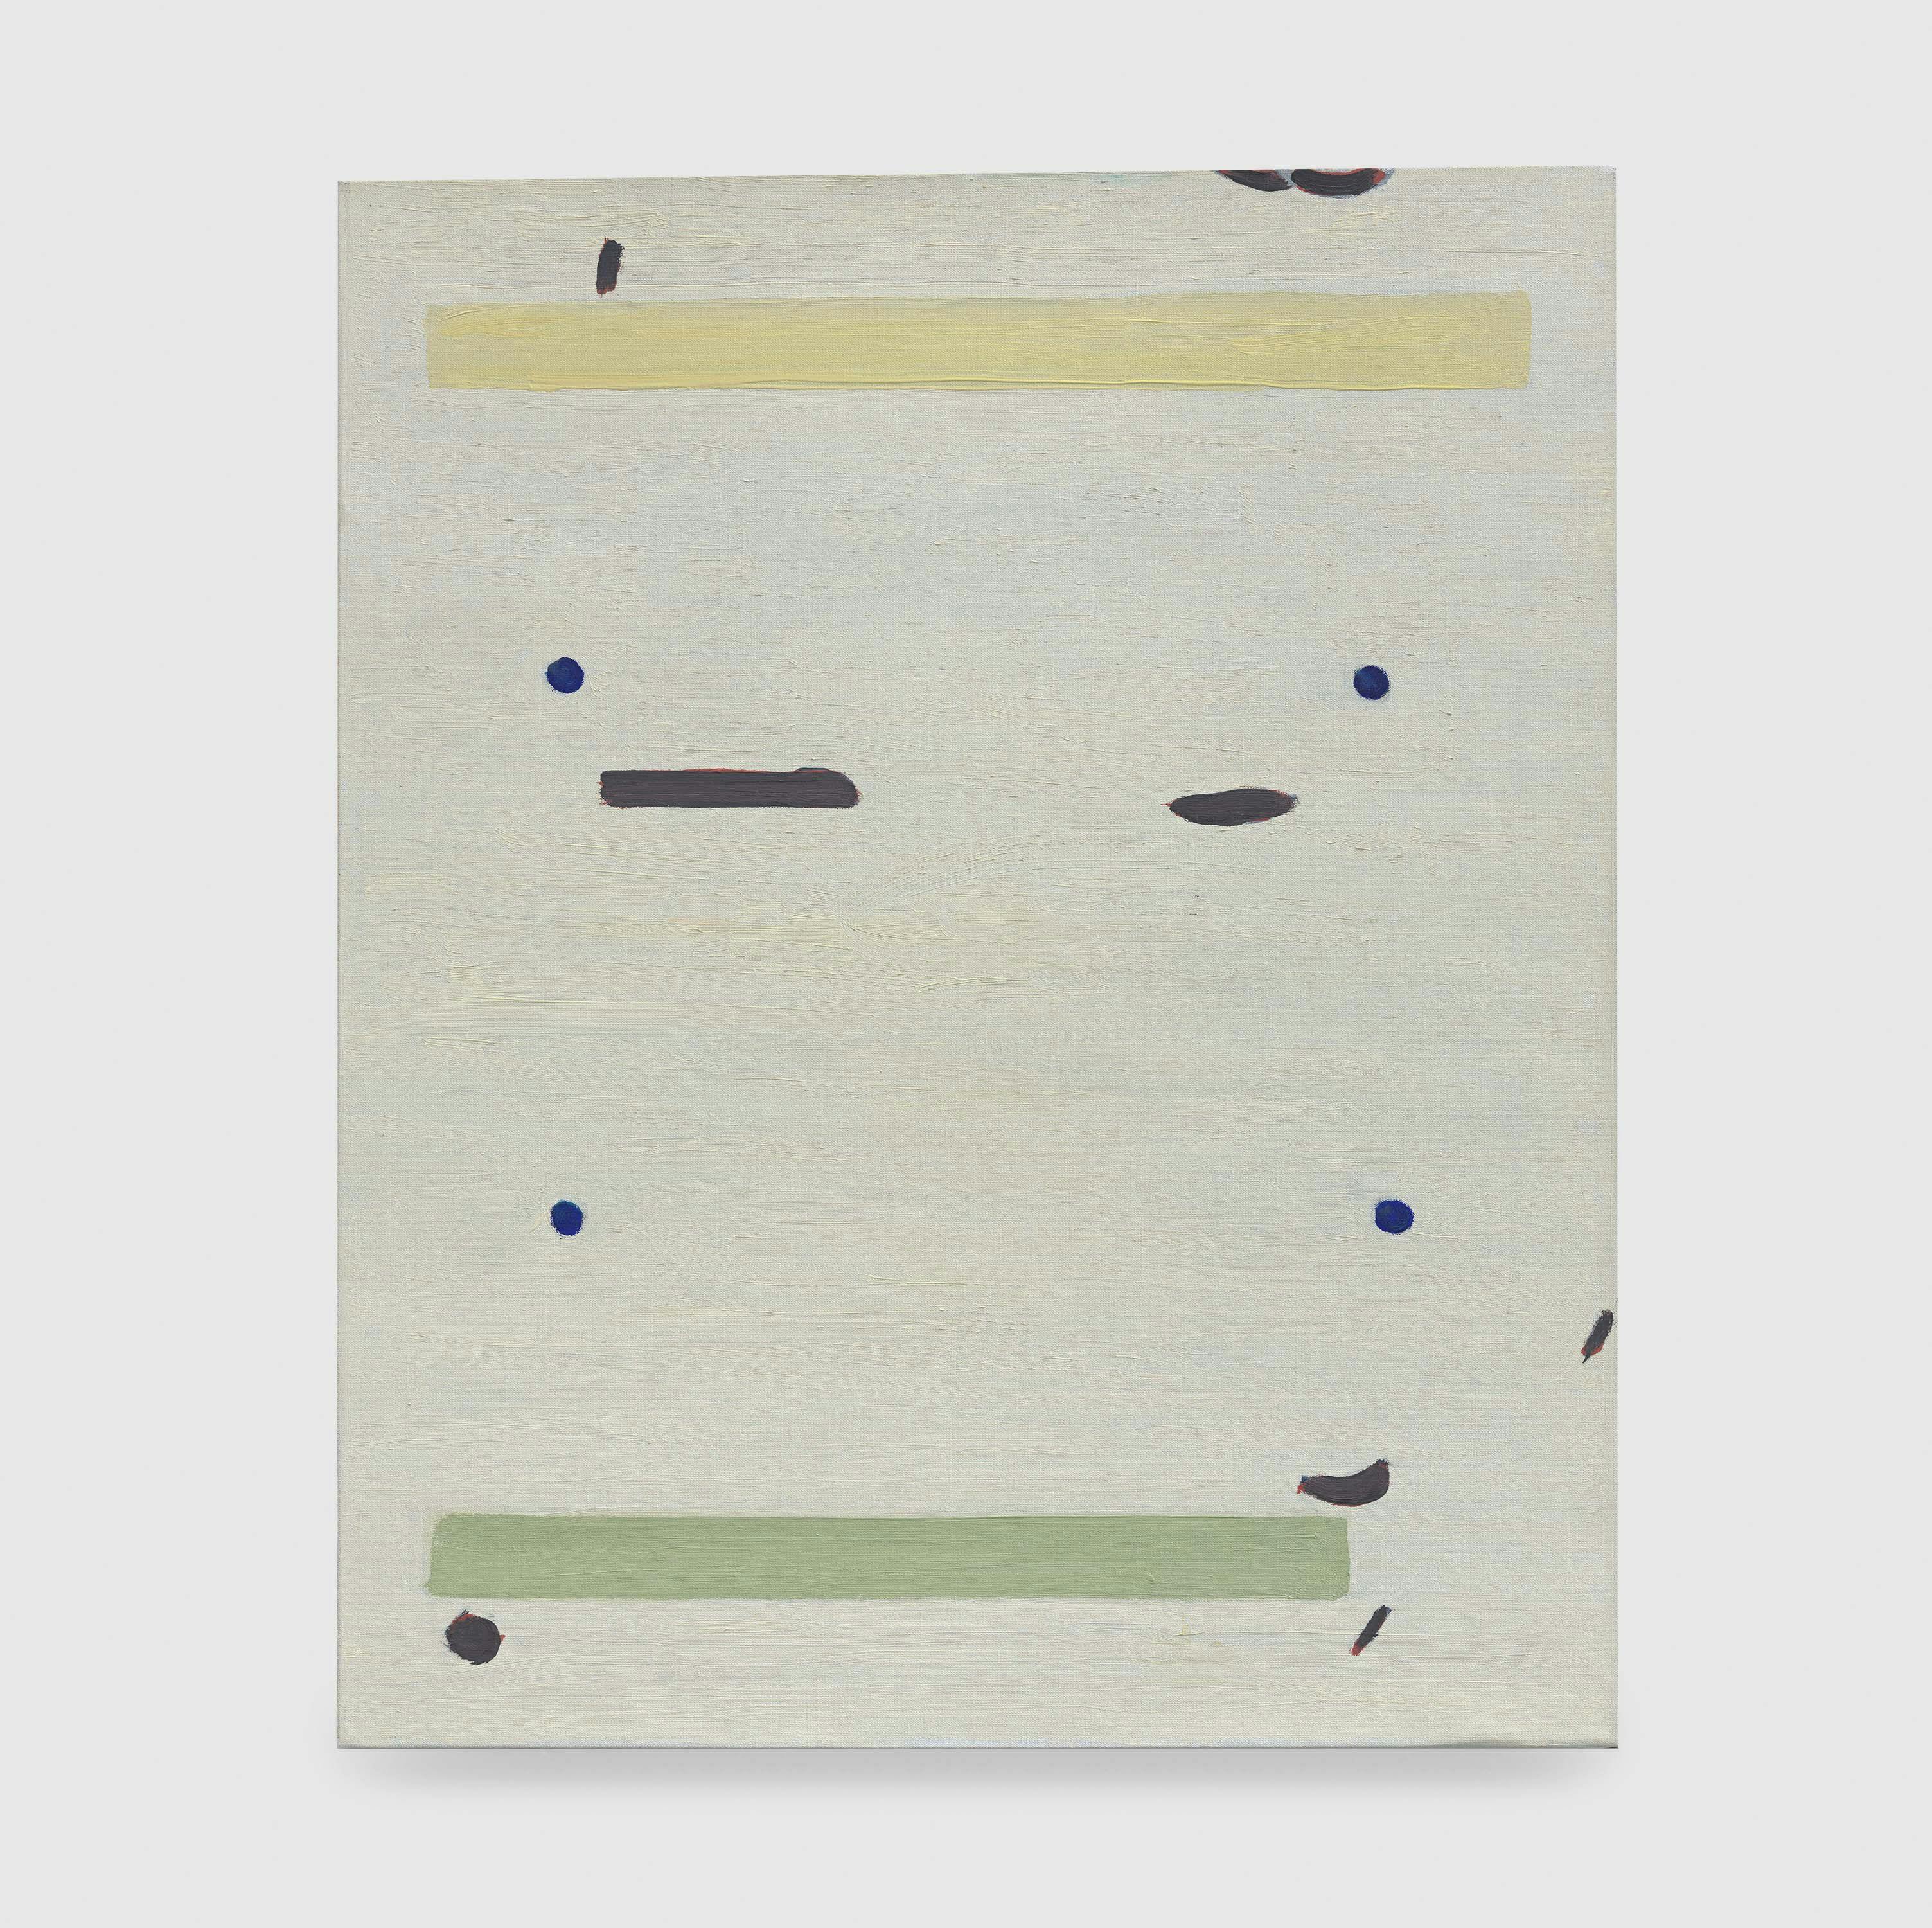 A painting by Raoul De Keyser, titled Recover, dated 2003.